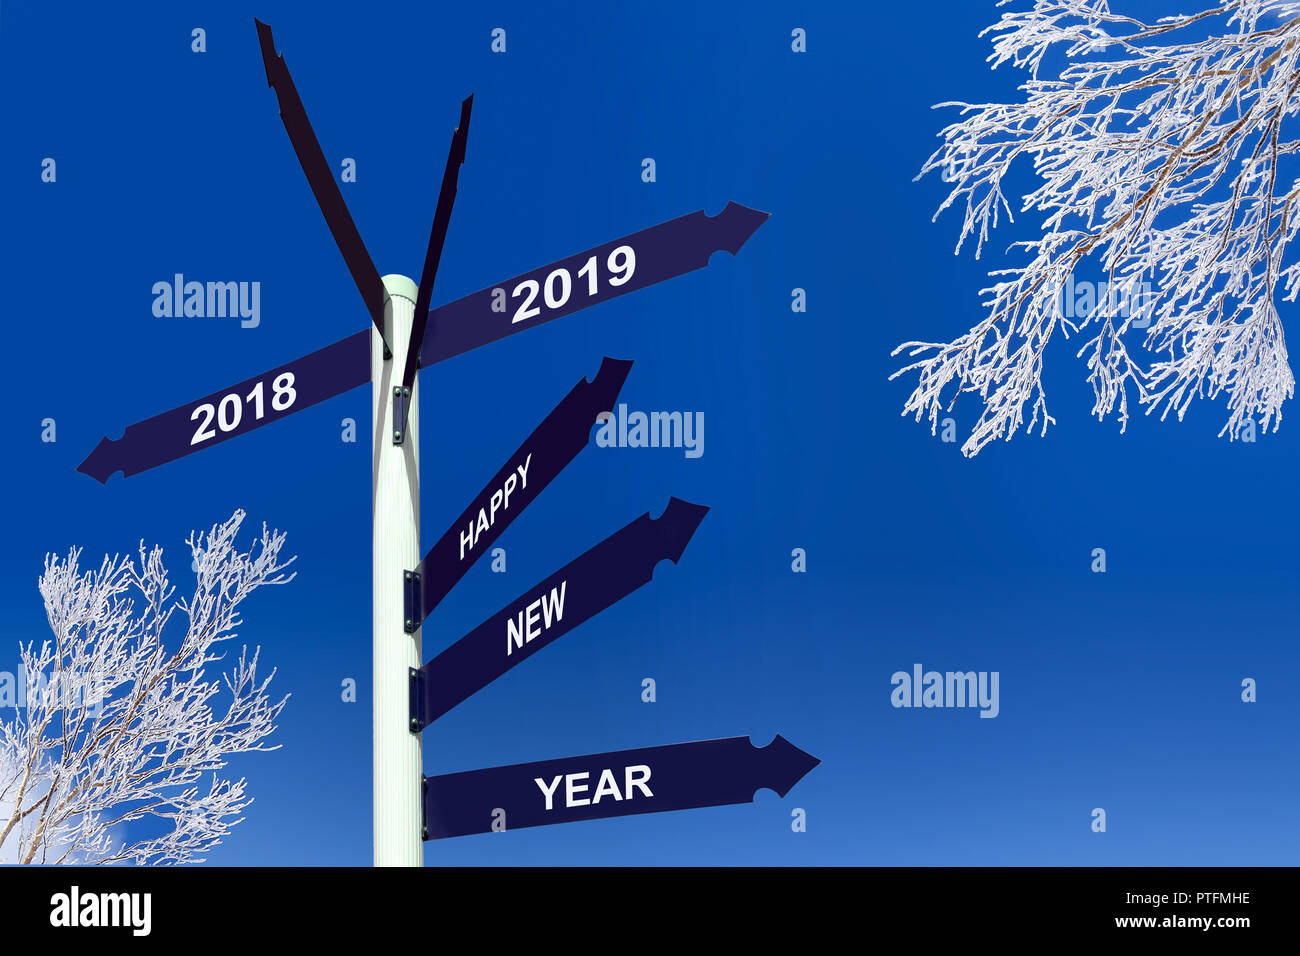 Happy new year 2019 on direction signs, snowy trees Stock Photo